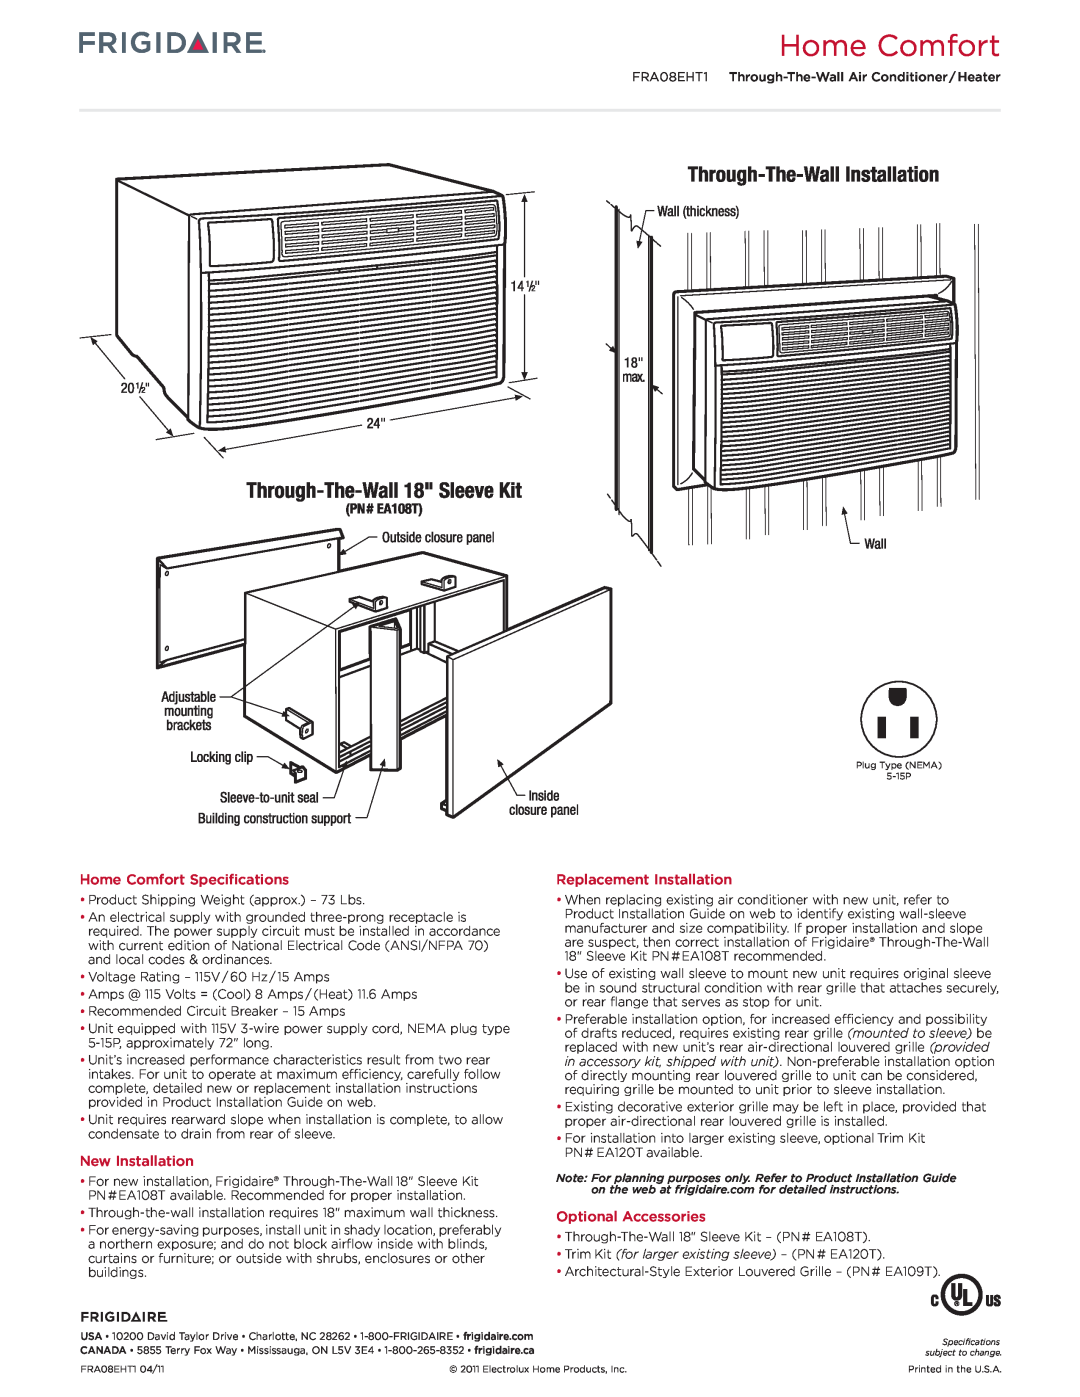 Frigidaire FRA08EHTI Home Comfort Specifications, New Installation, Replacement Installation, Optional Accessories 